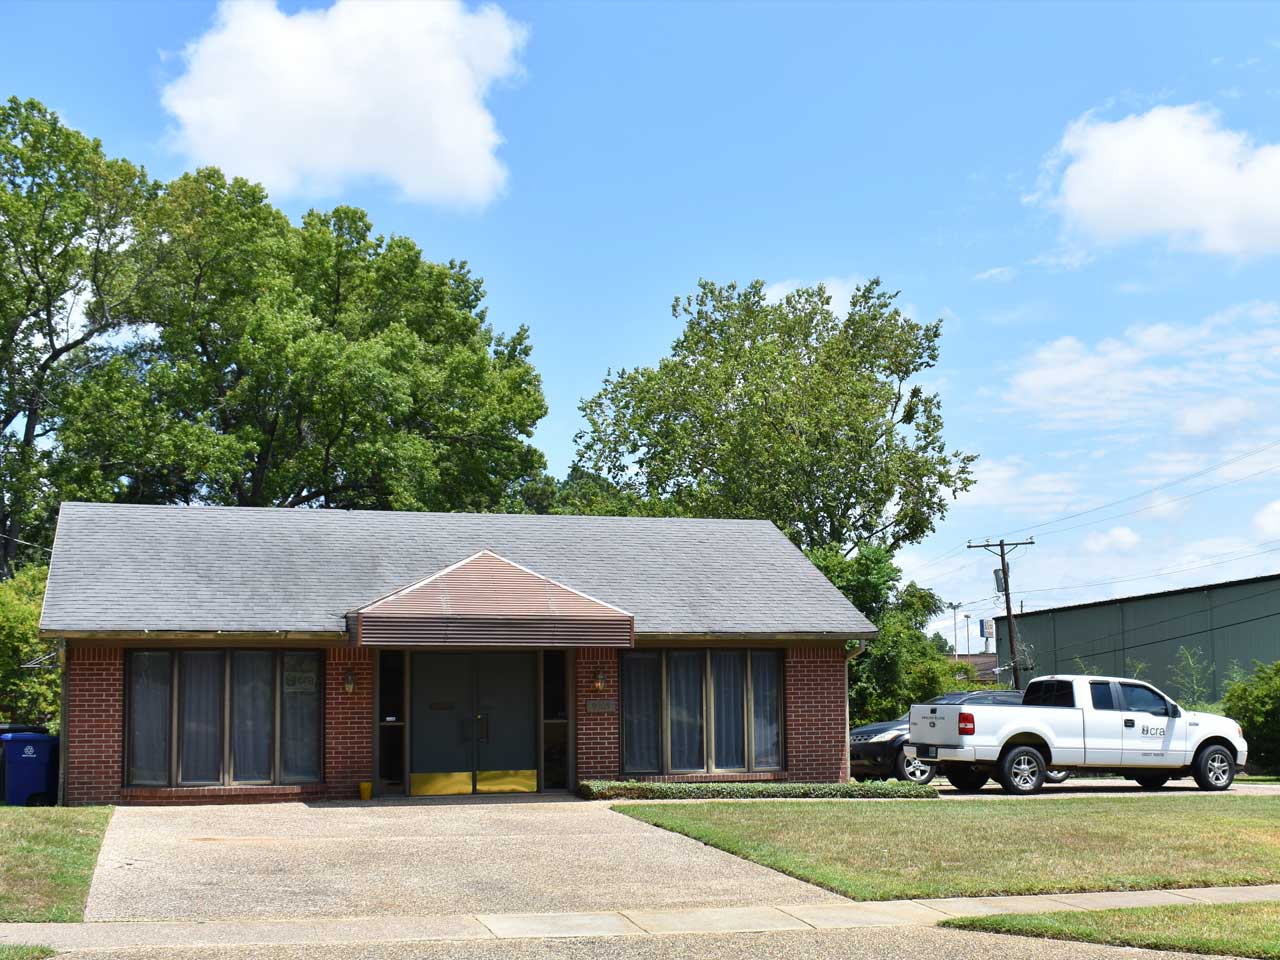 Location of Louisiana office, a one-story brick building.